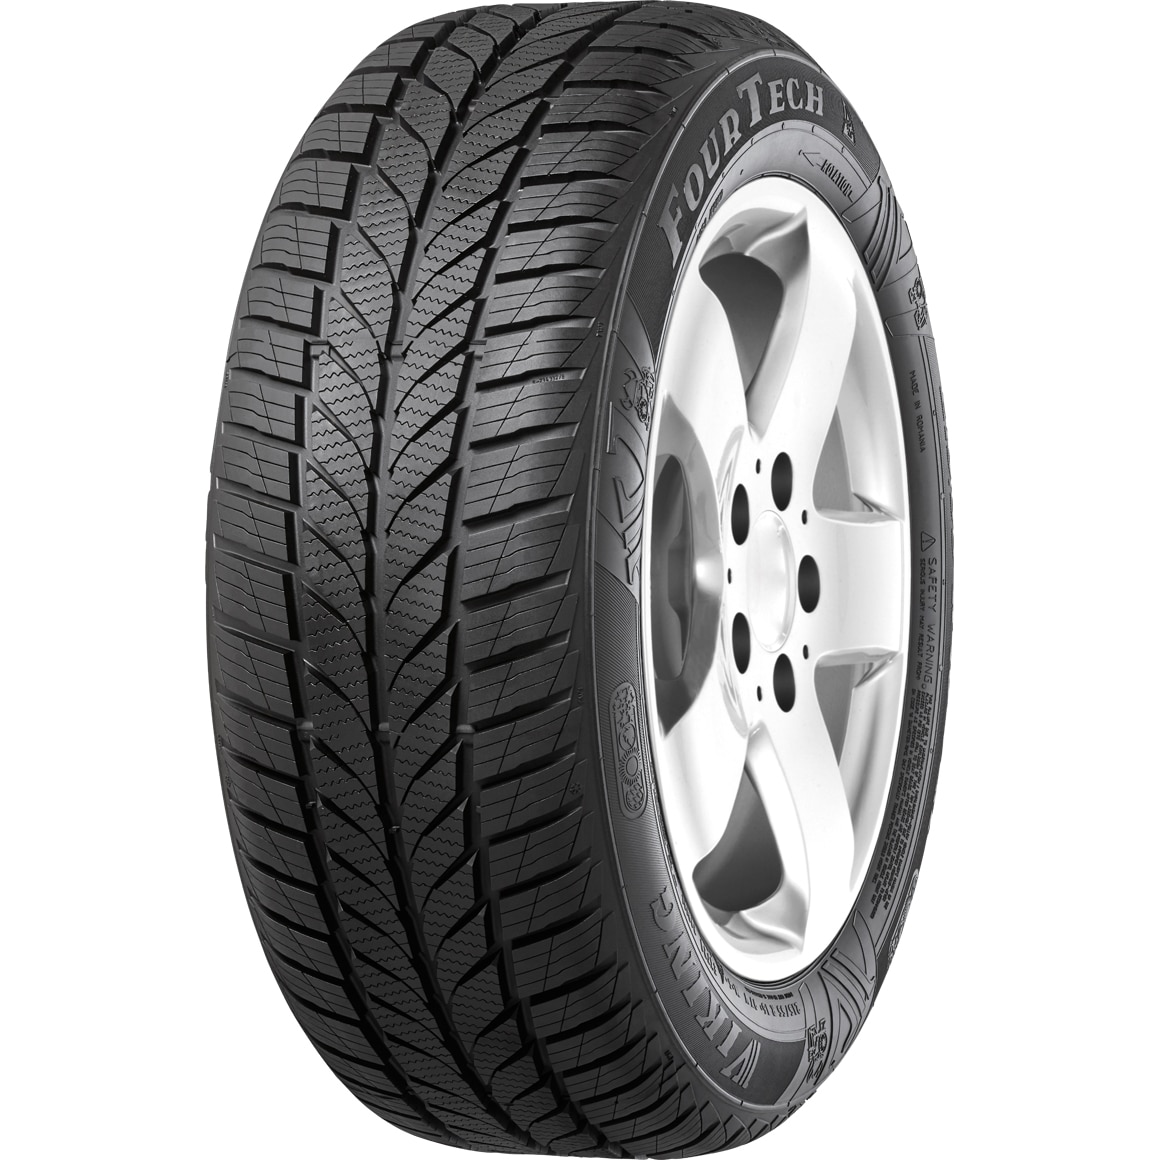 Anvelopa Four Tech 185/60R14 82H - eMAG.ro